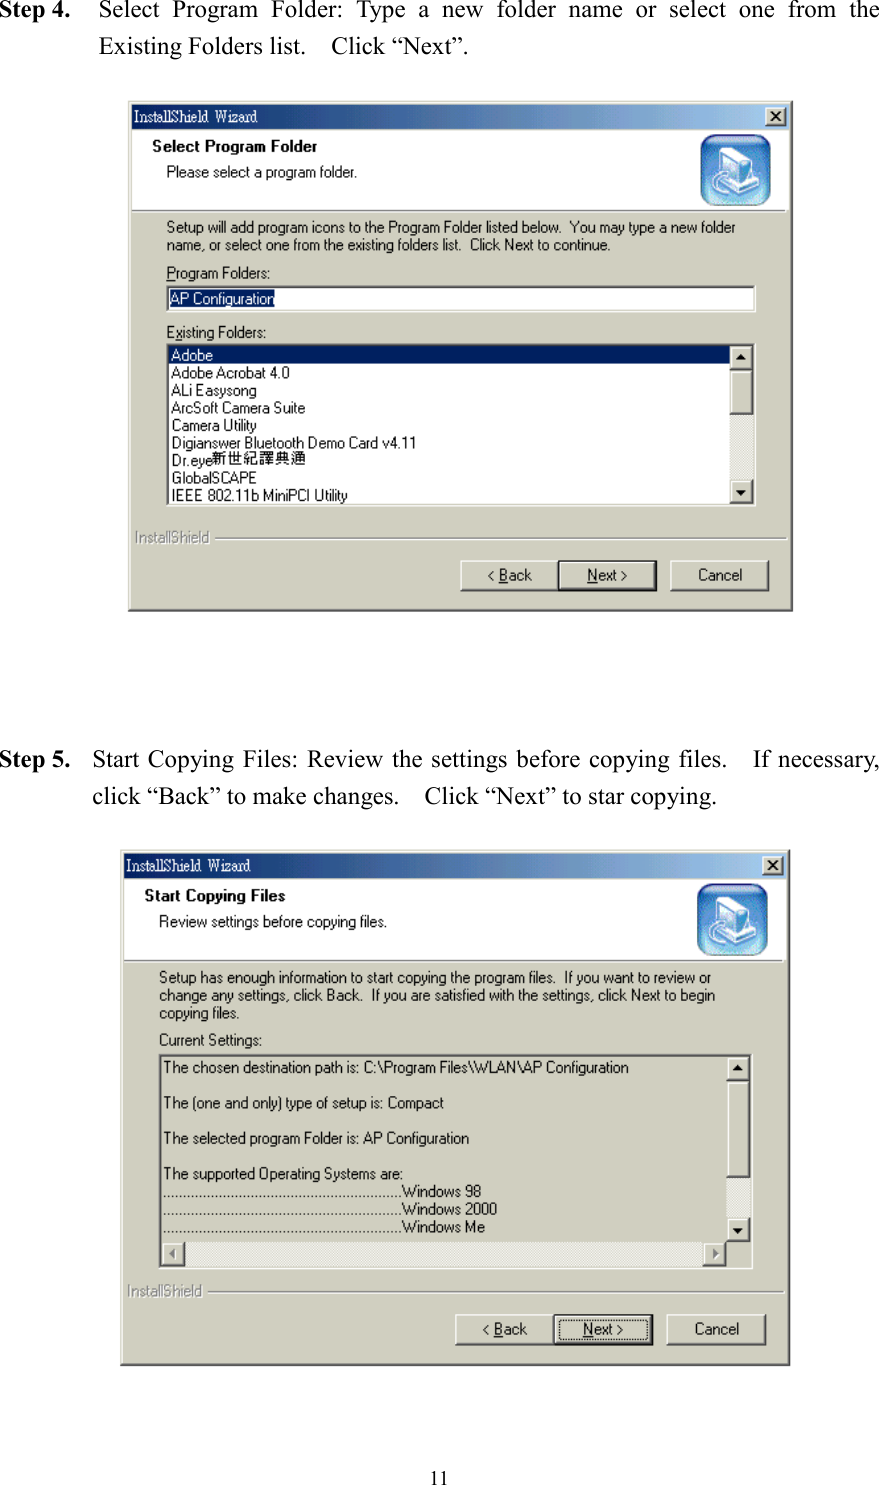 11Step 4. Select Program Folder: Type a new folder name or select one from theExisting Folders list.    Click “Next”.Step 5. Start Copying Files: Review the settings before copying files.    If necessary,click “Back” to make changes.    Click “Next” to star copying.